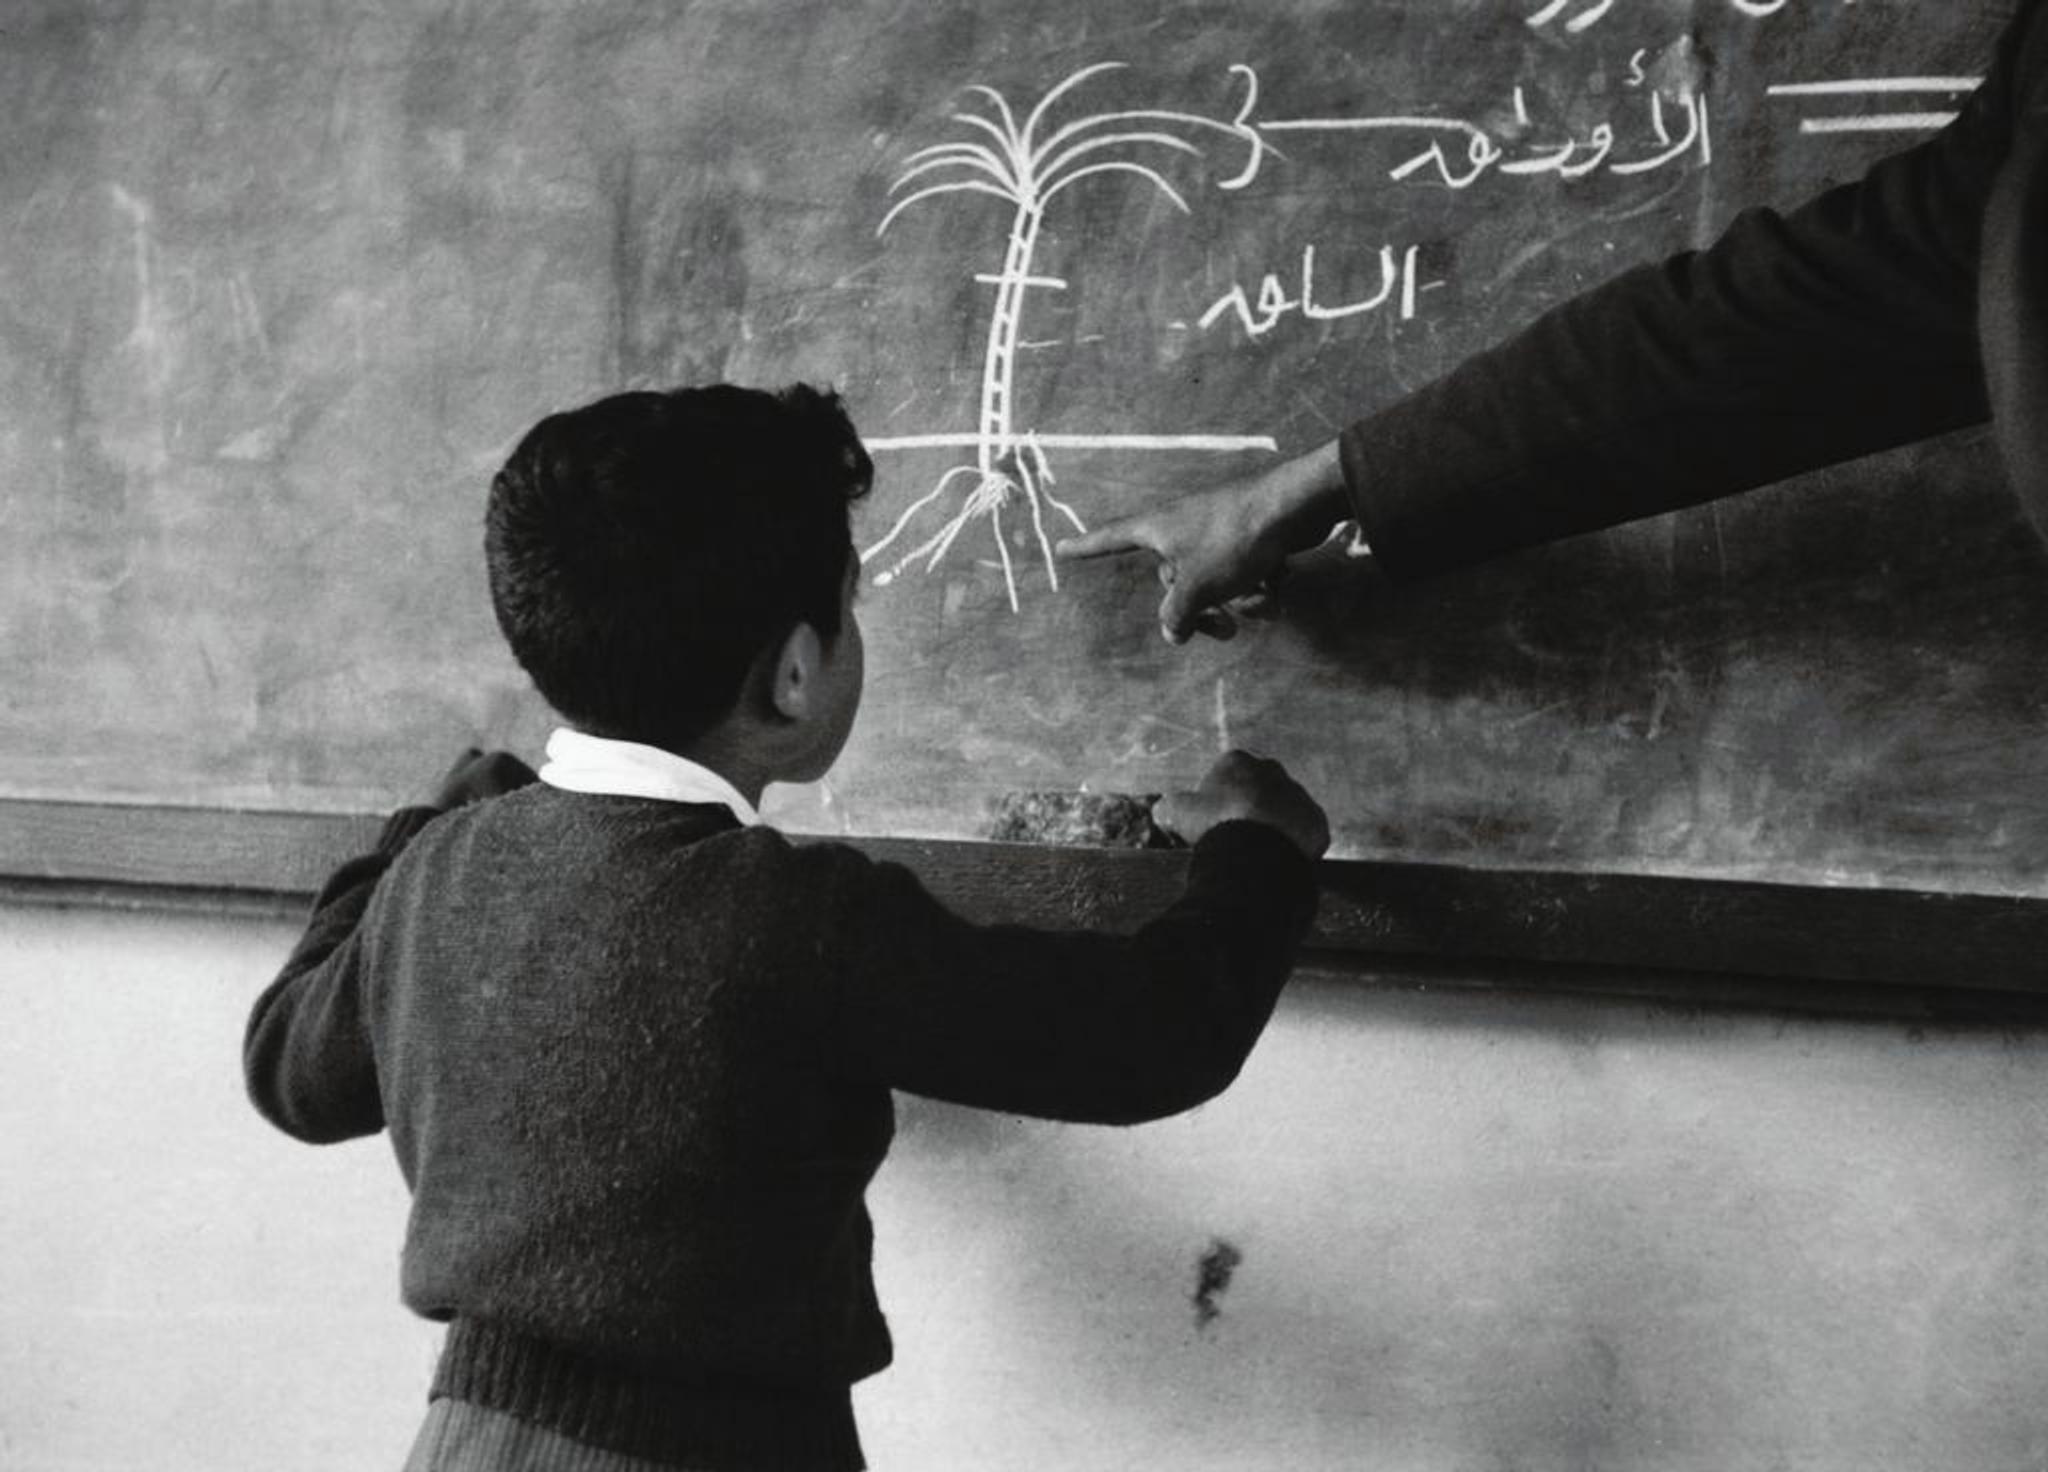 Boy in front of a blackboard in a classroom teaching situation.